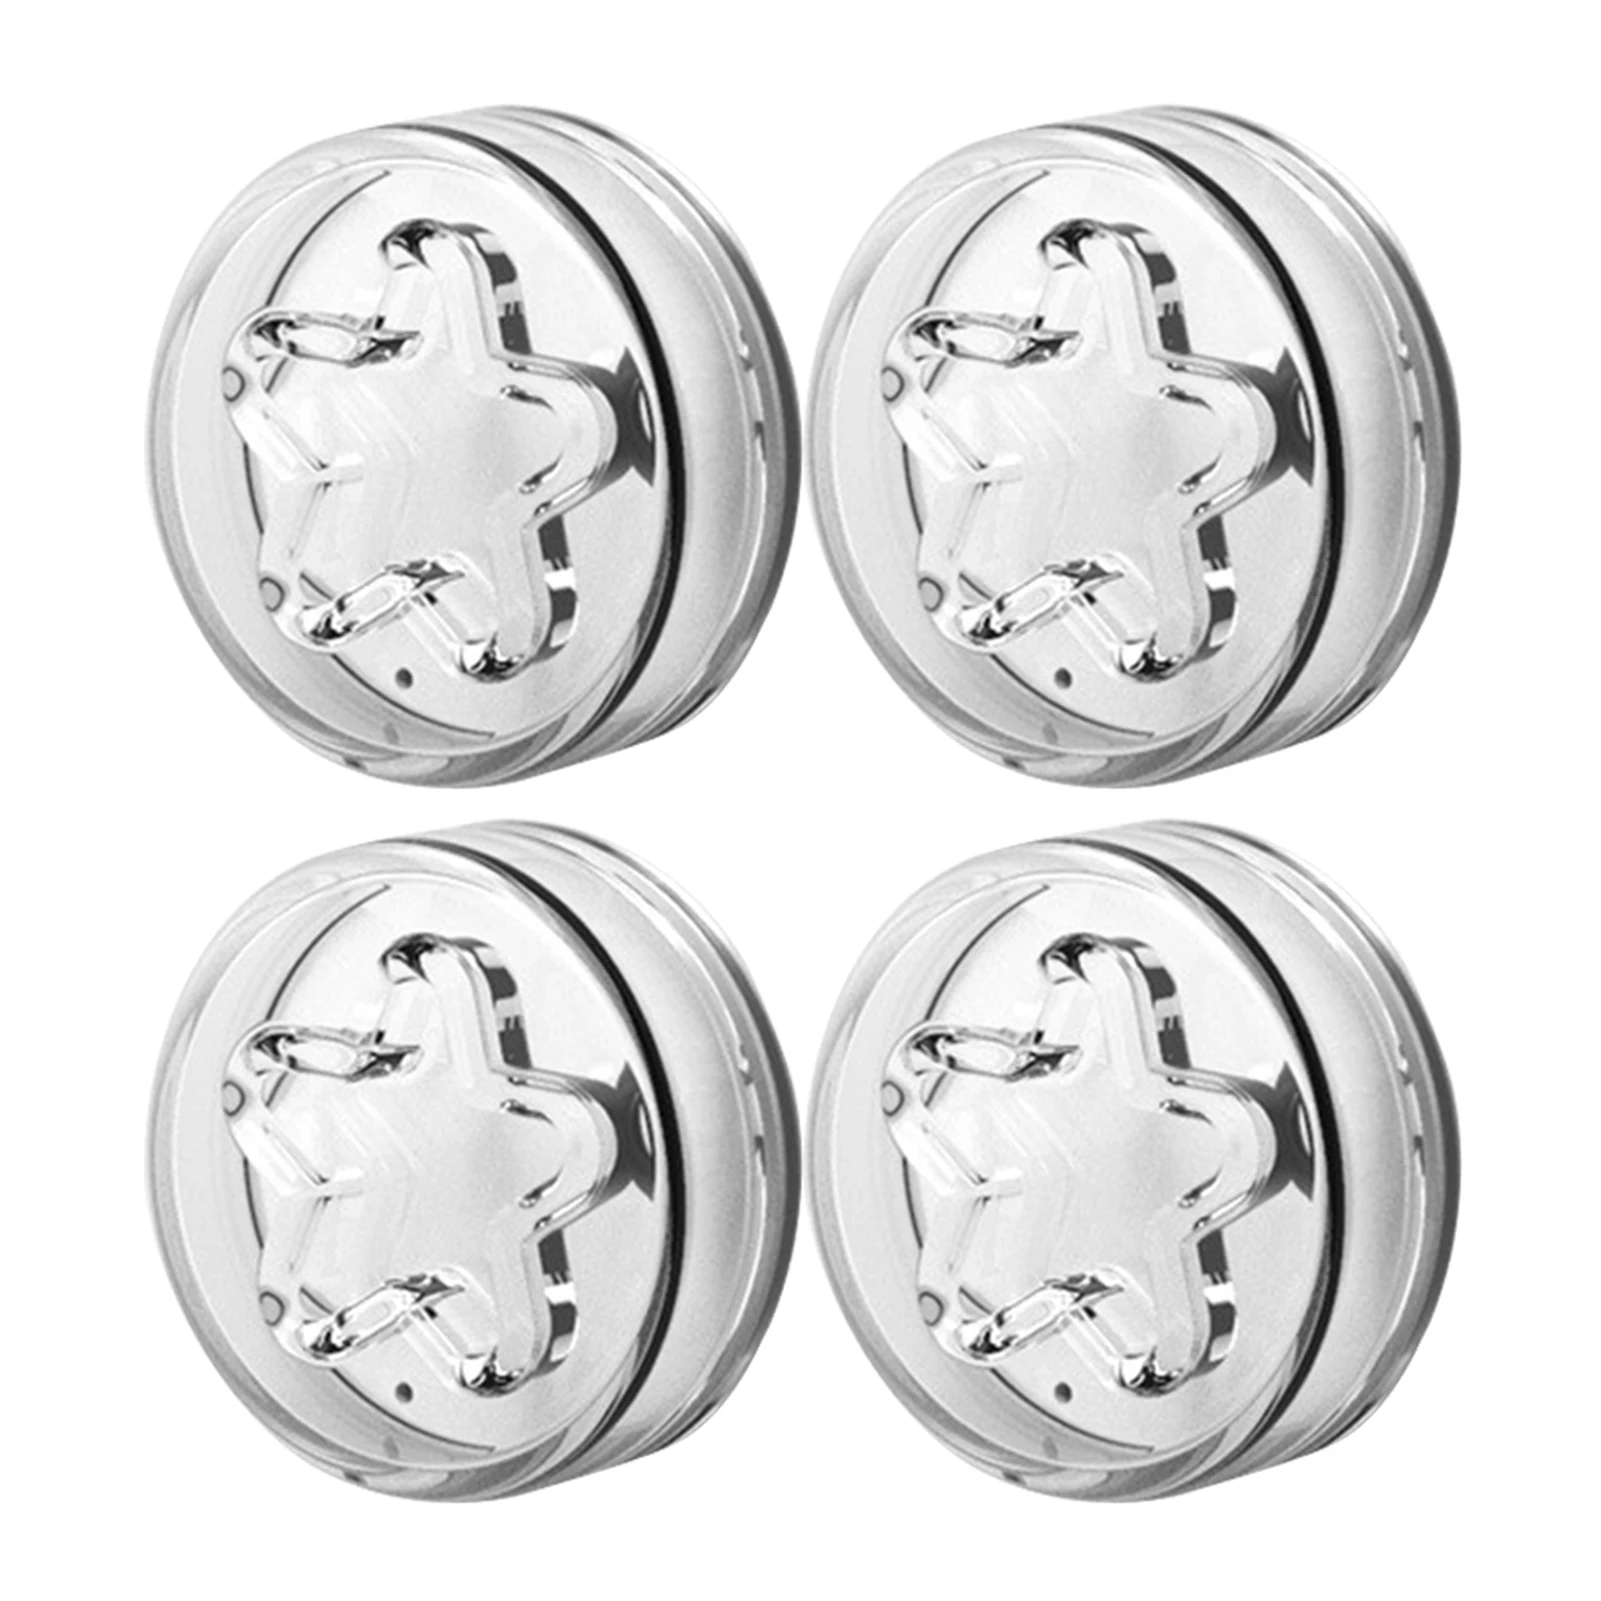 

4pcs/pack Door Handle Cushion Clear Soft PVC Anti Collision Wall Protector Shield Knobs Baby Safety Stopper Reduce Noise Guard